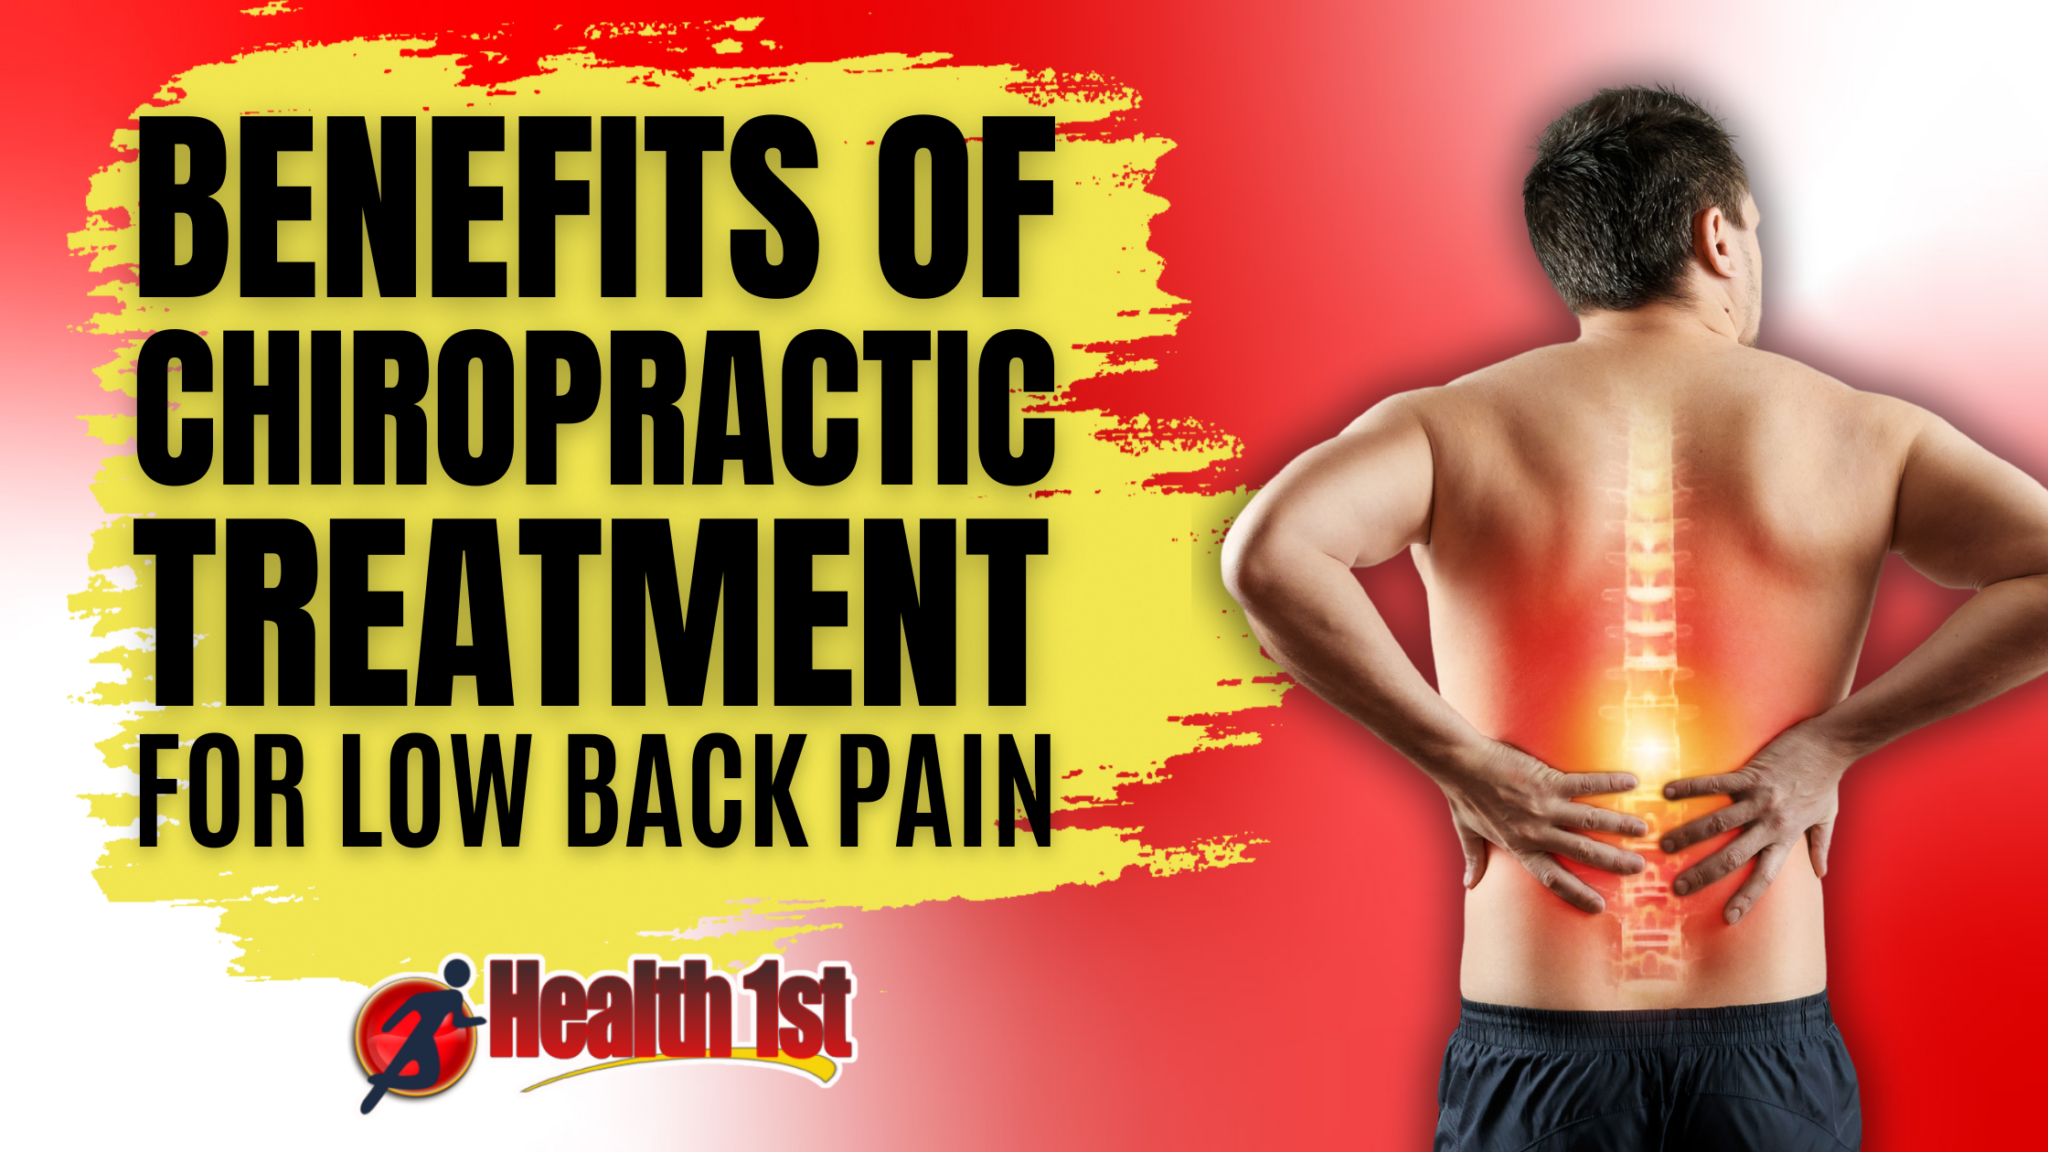 Chiropractic Treatment for Low Back Pain Health 1st